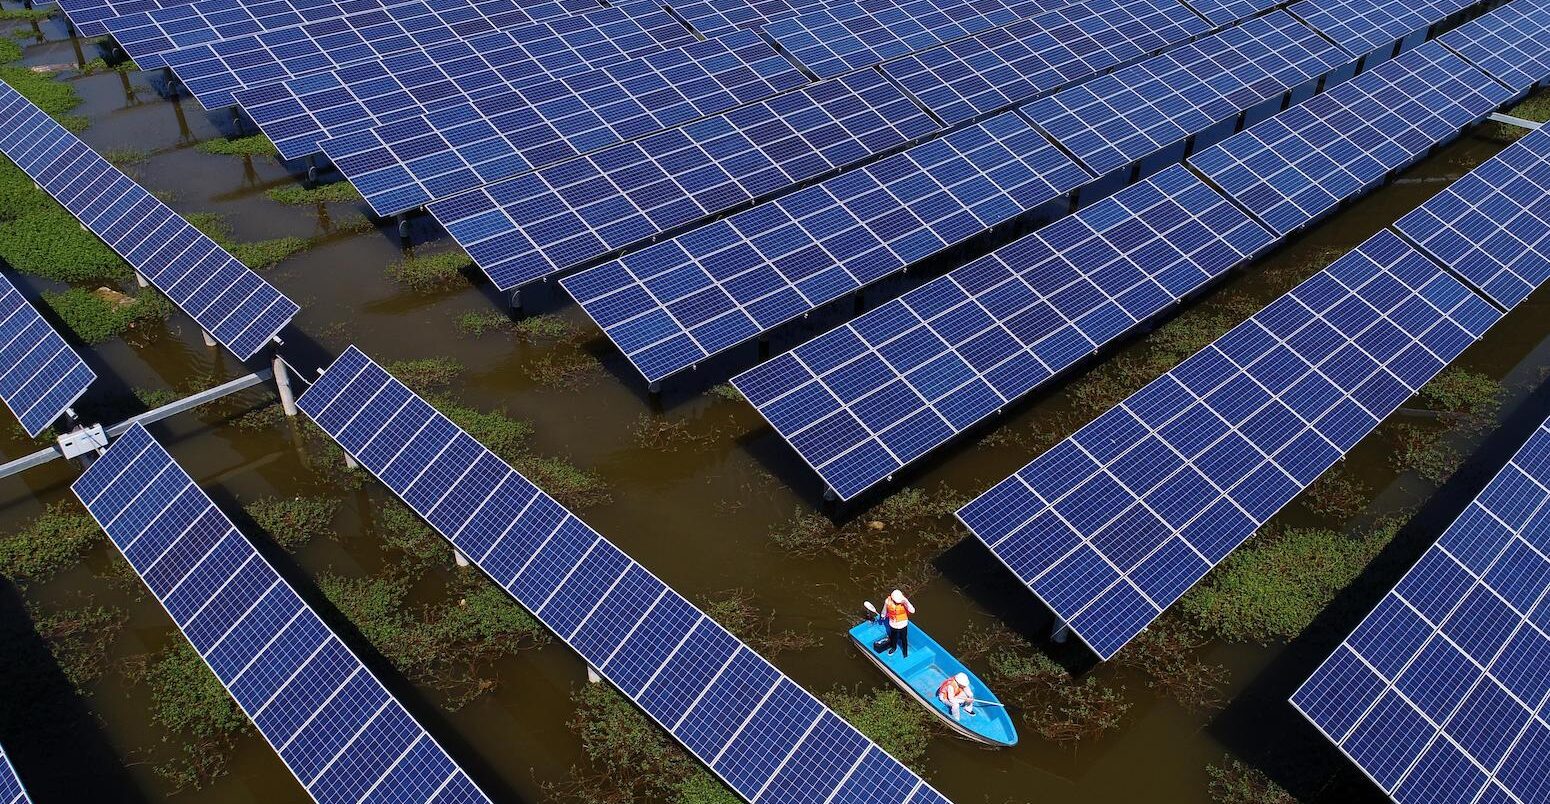 Workers boat past solar panels in a floating solar energy farm in Jingzhou, China. Image ID: W791EX.